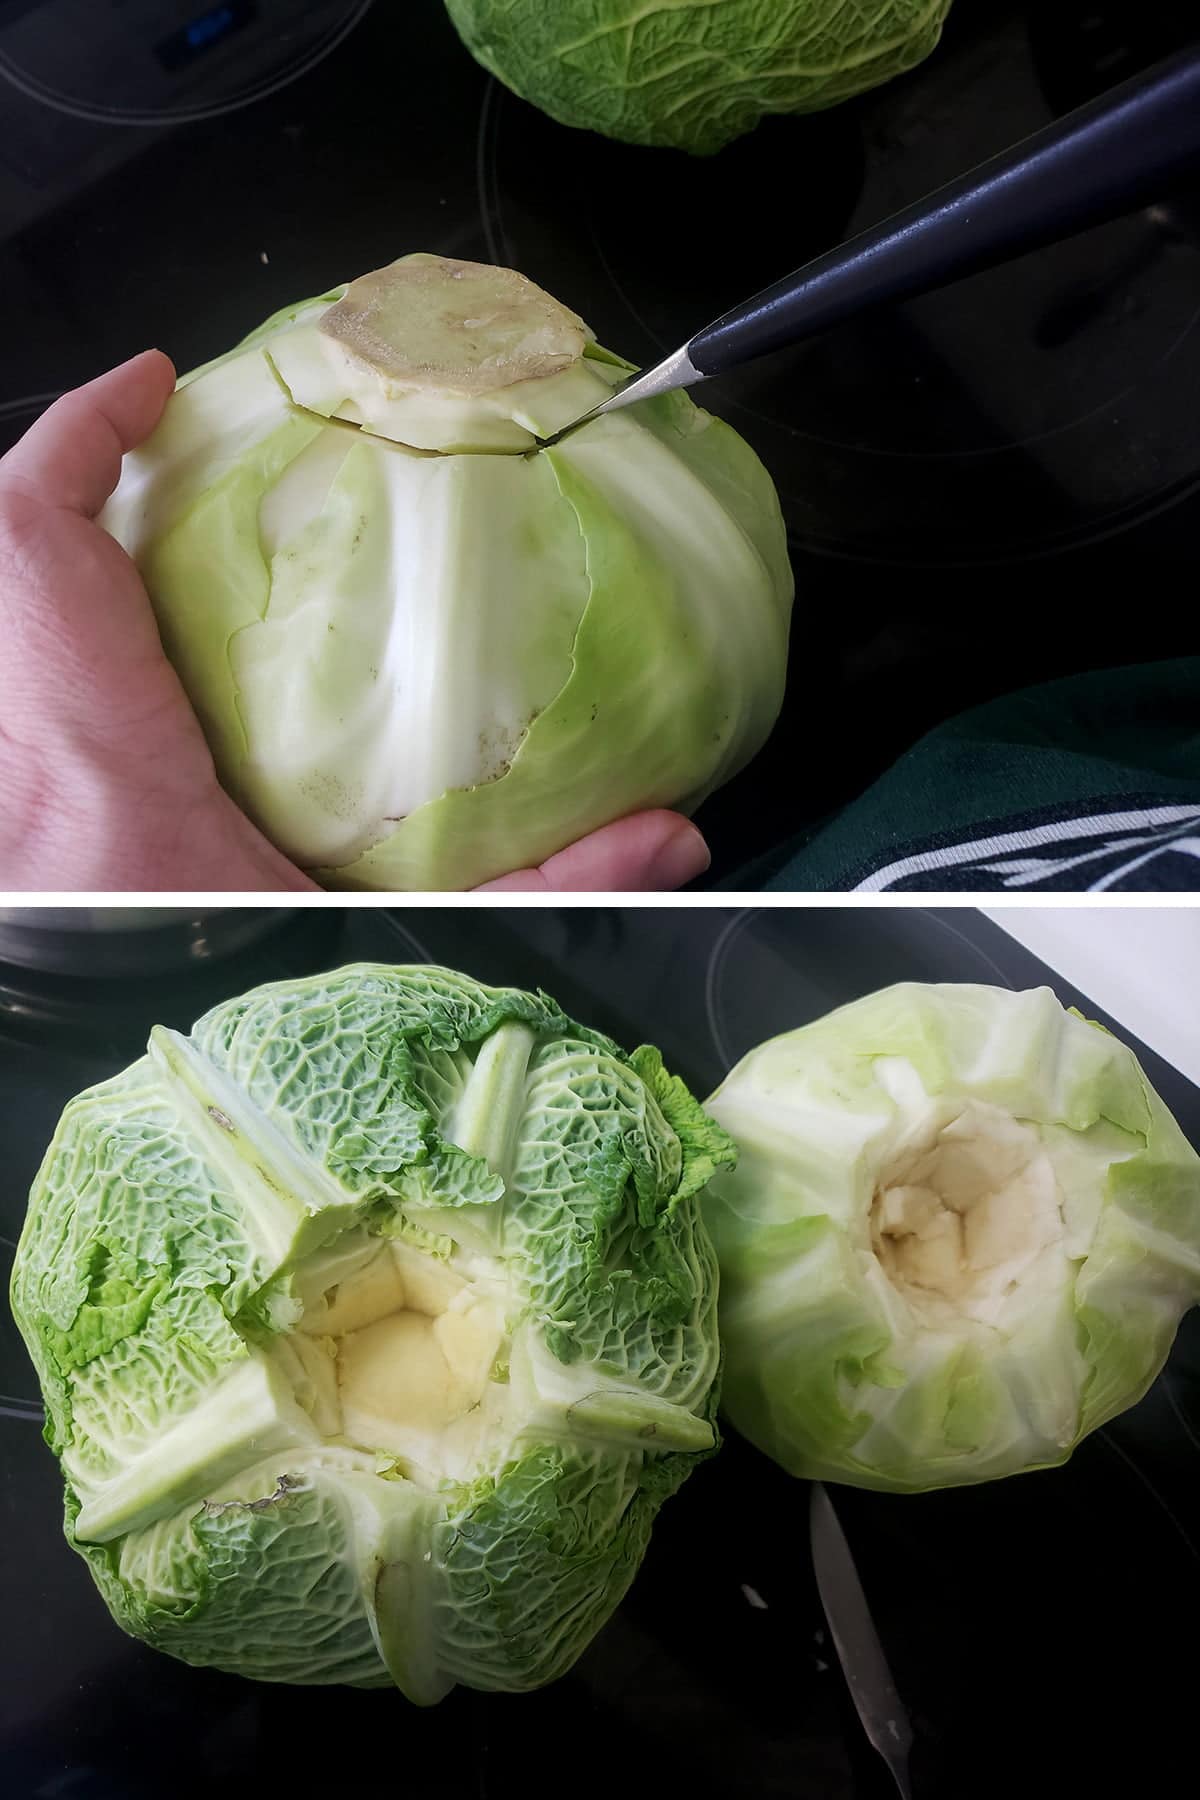 A two part compilation image showing a knife being used to remove the core of the cabbage.